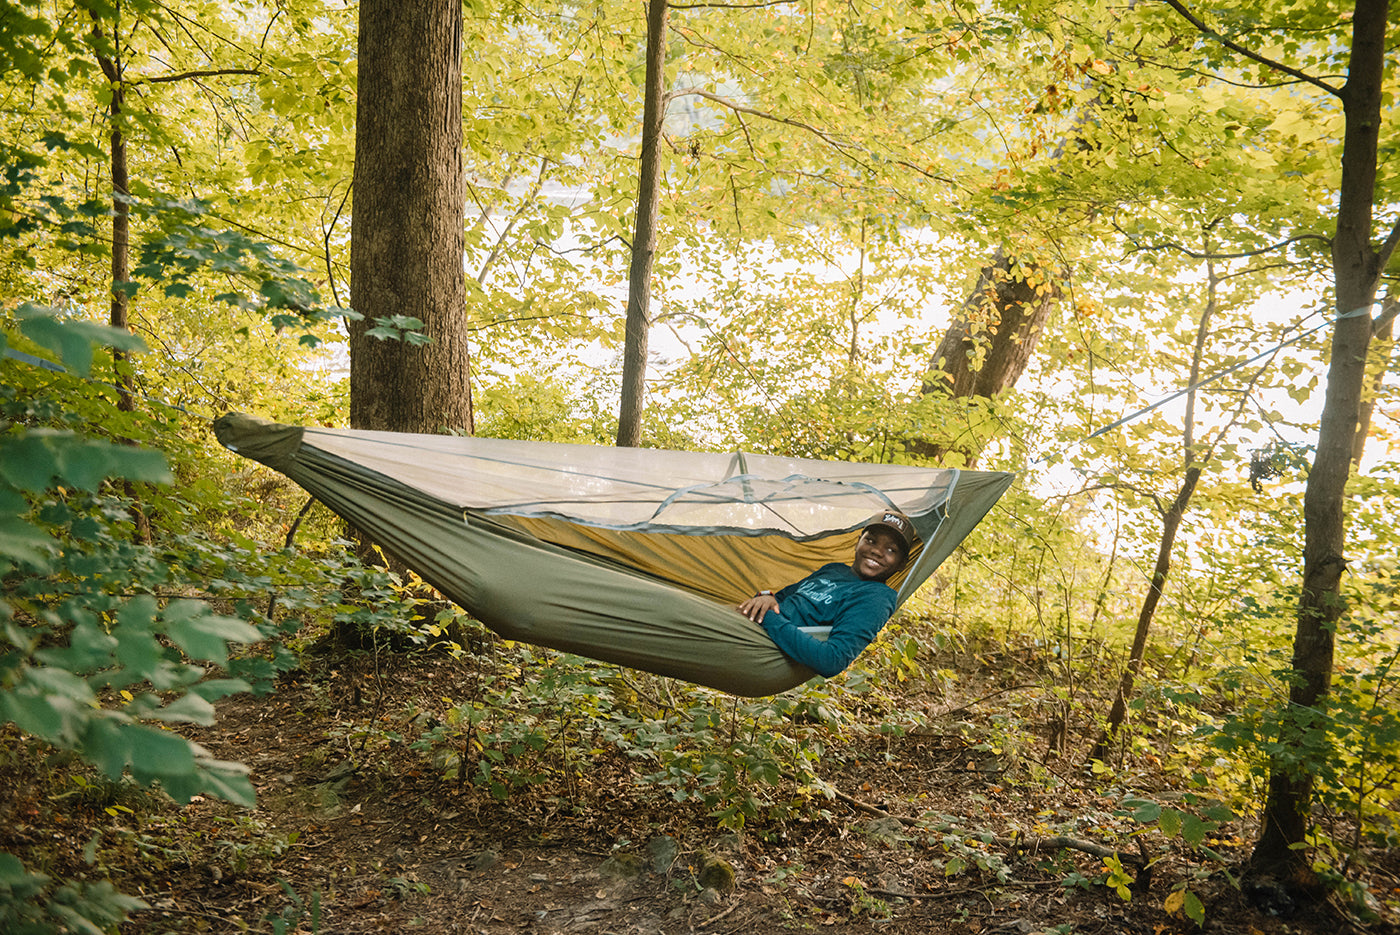 A boy lays in a JungleNest Hammock while in the forest.